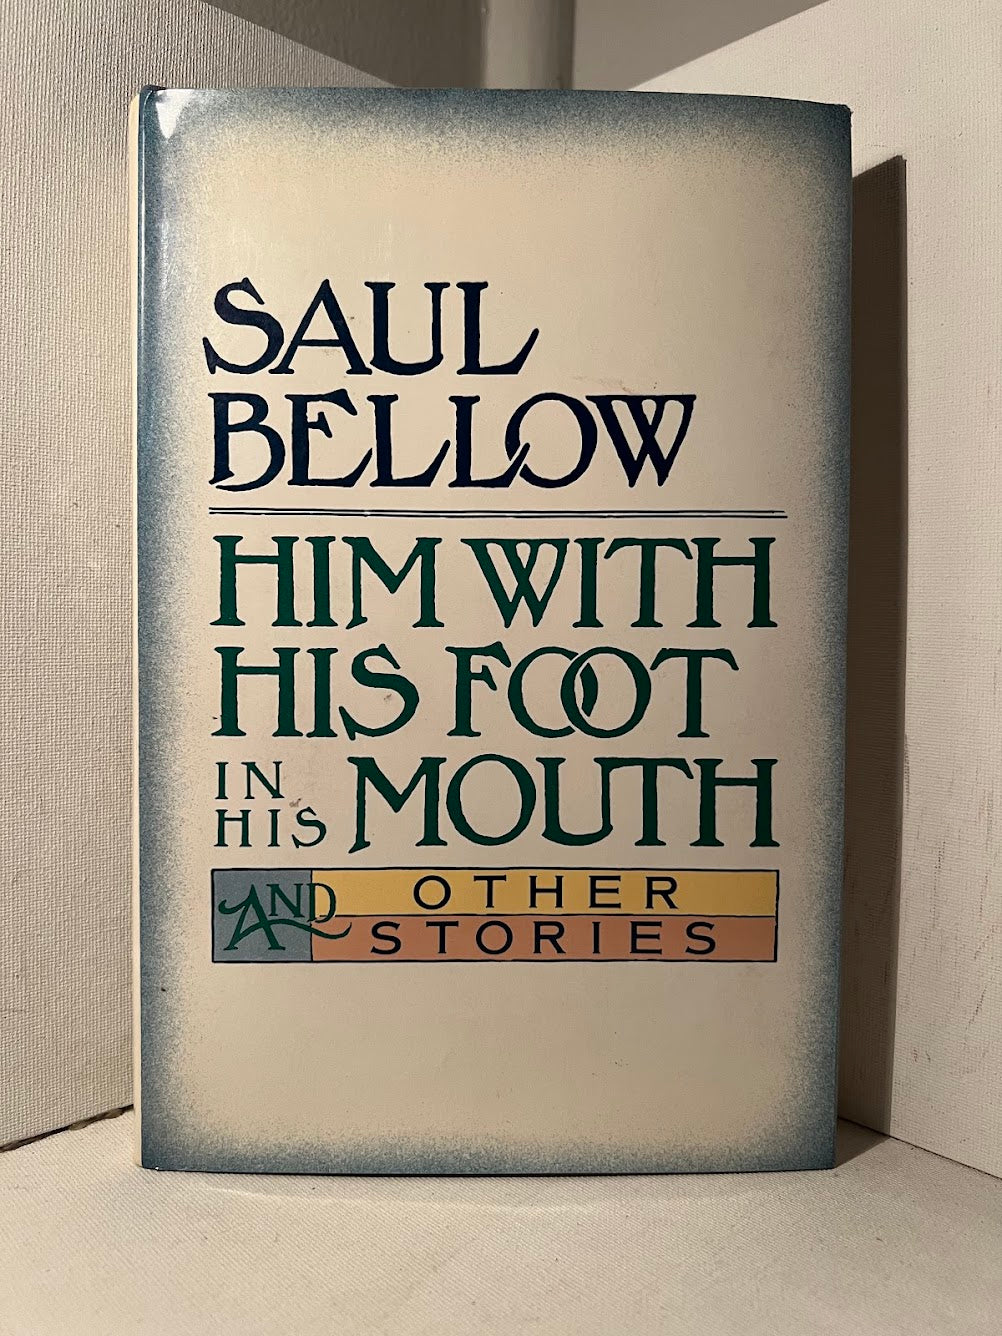 Him With His Foot in His Mouth and Other Stories by Saul Bellow